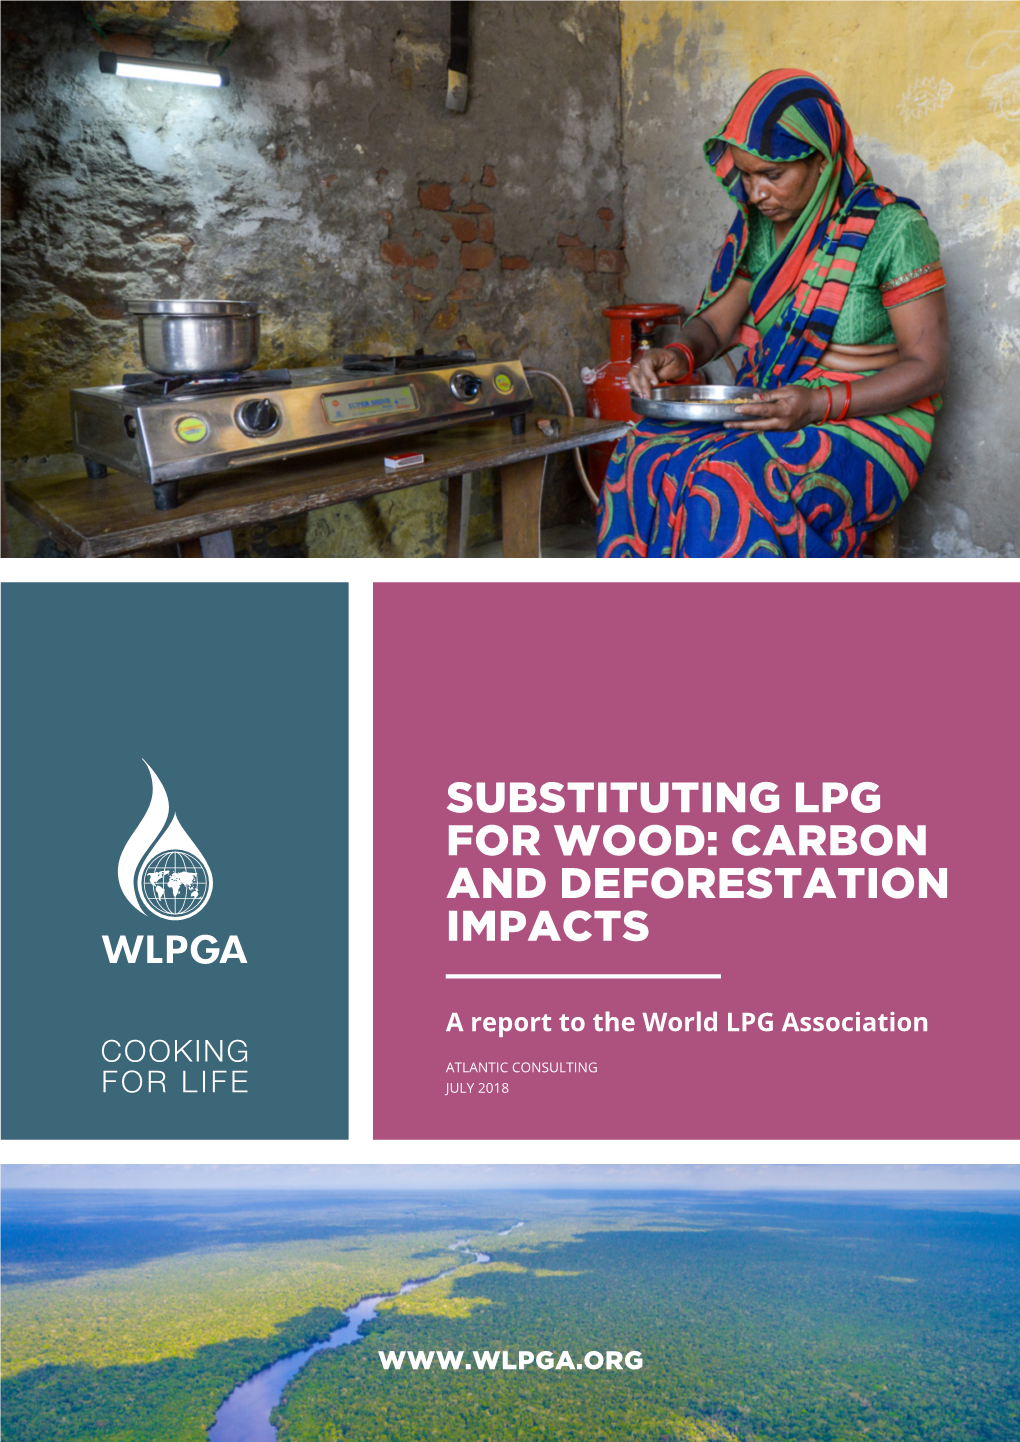 Substituting Lpg for Wood: Carbon and Deforestation Impacts